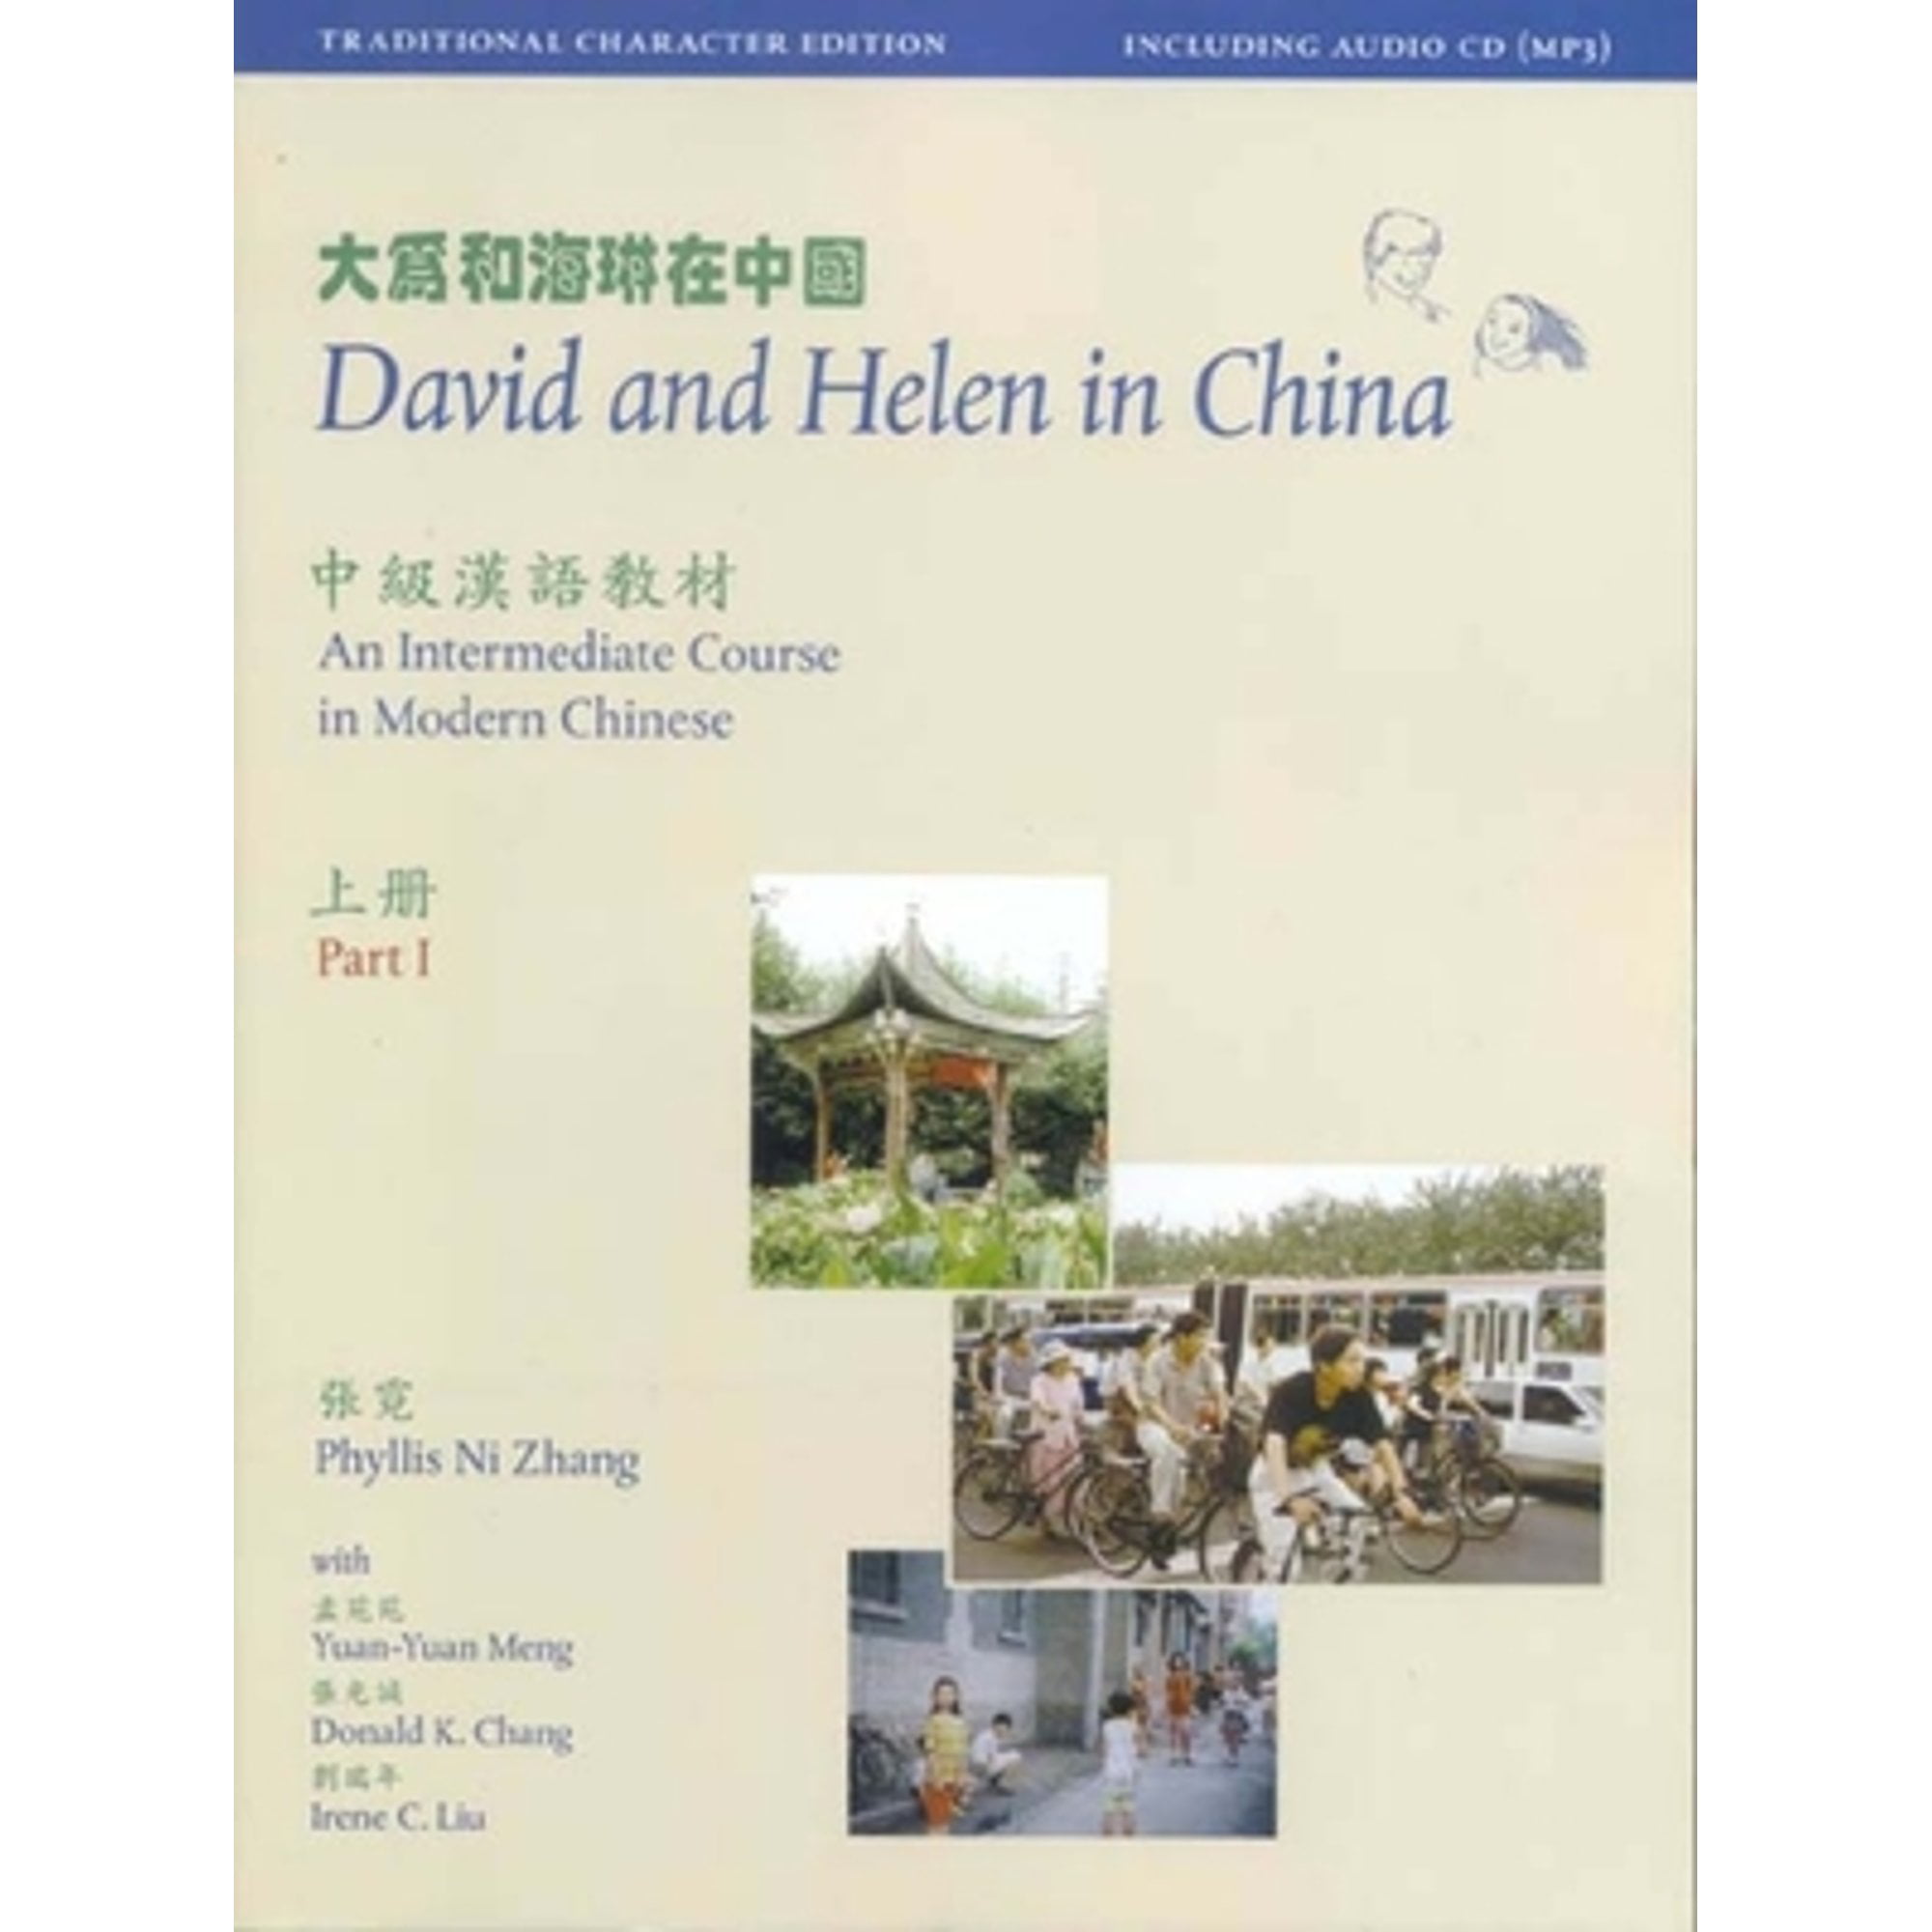 Pre-Owned David and Helen in China: Traditional Character Edition: An Intermediate Course Modern (Paperback 9780300227291) by Phyllis Ni Zhang, Yuan-Yuan Meng, Donald K. Chang